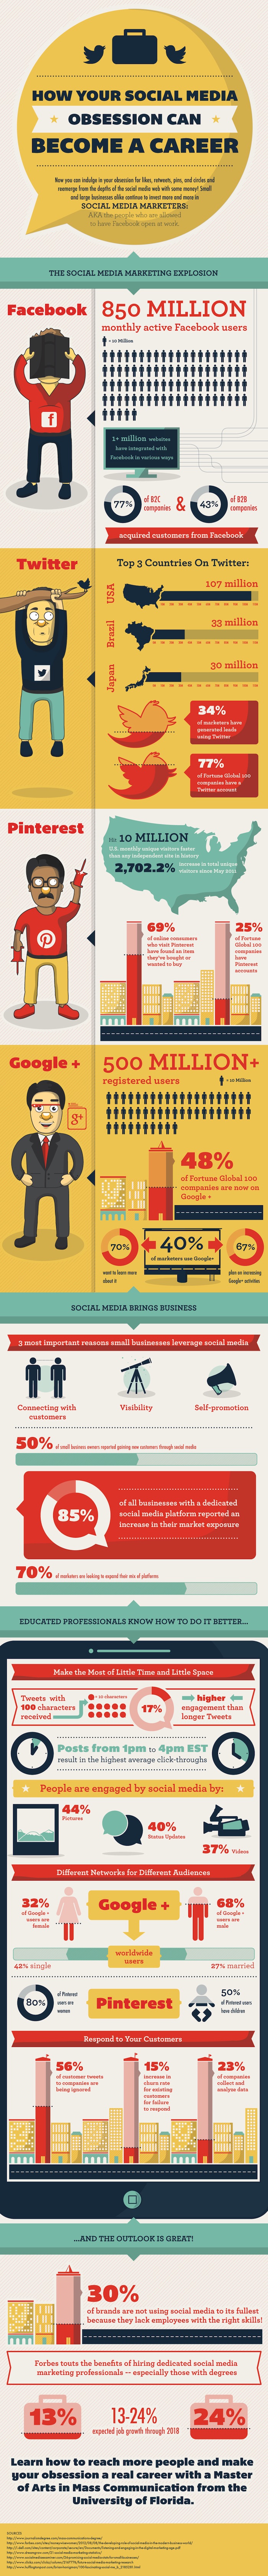 How Can Your Social Media Obsession Help with Your Career [INFOGRAPHIC]